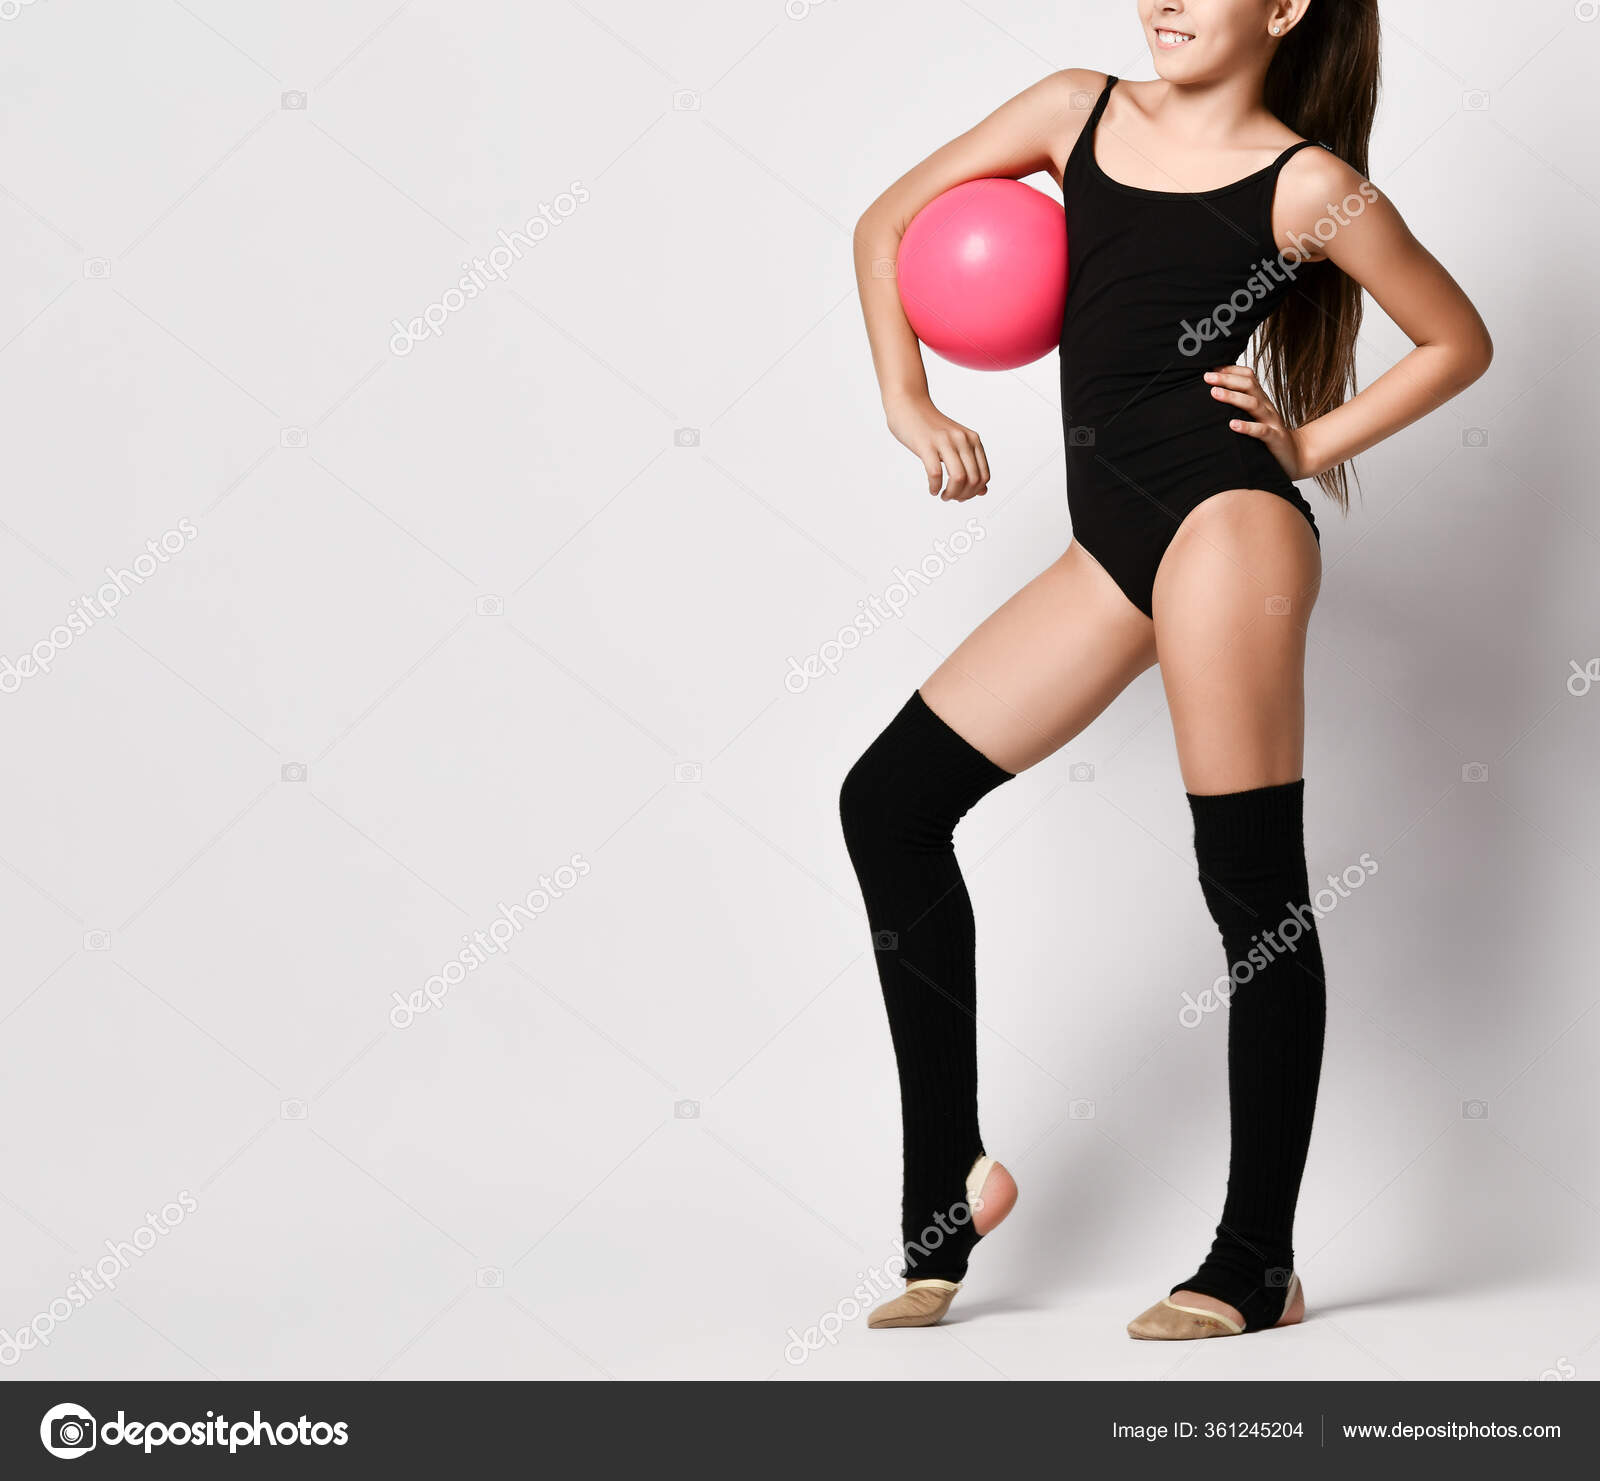 Cropped Photo Of Girl Gymnast In Black Body And Leggings Is